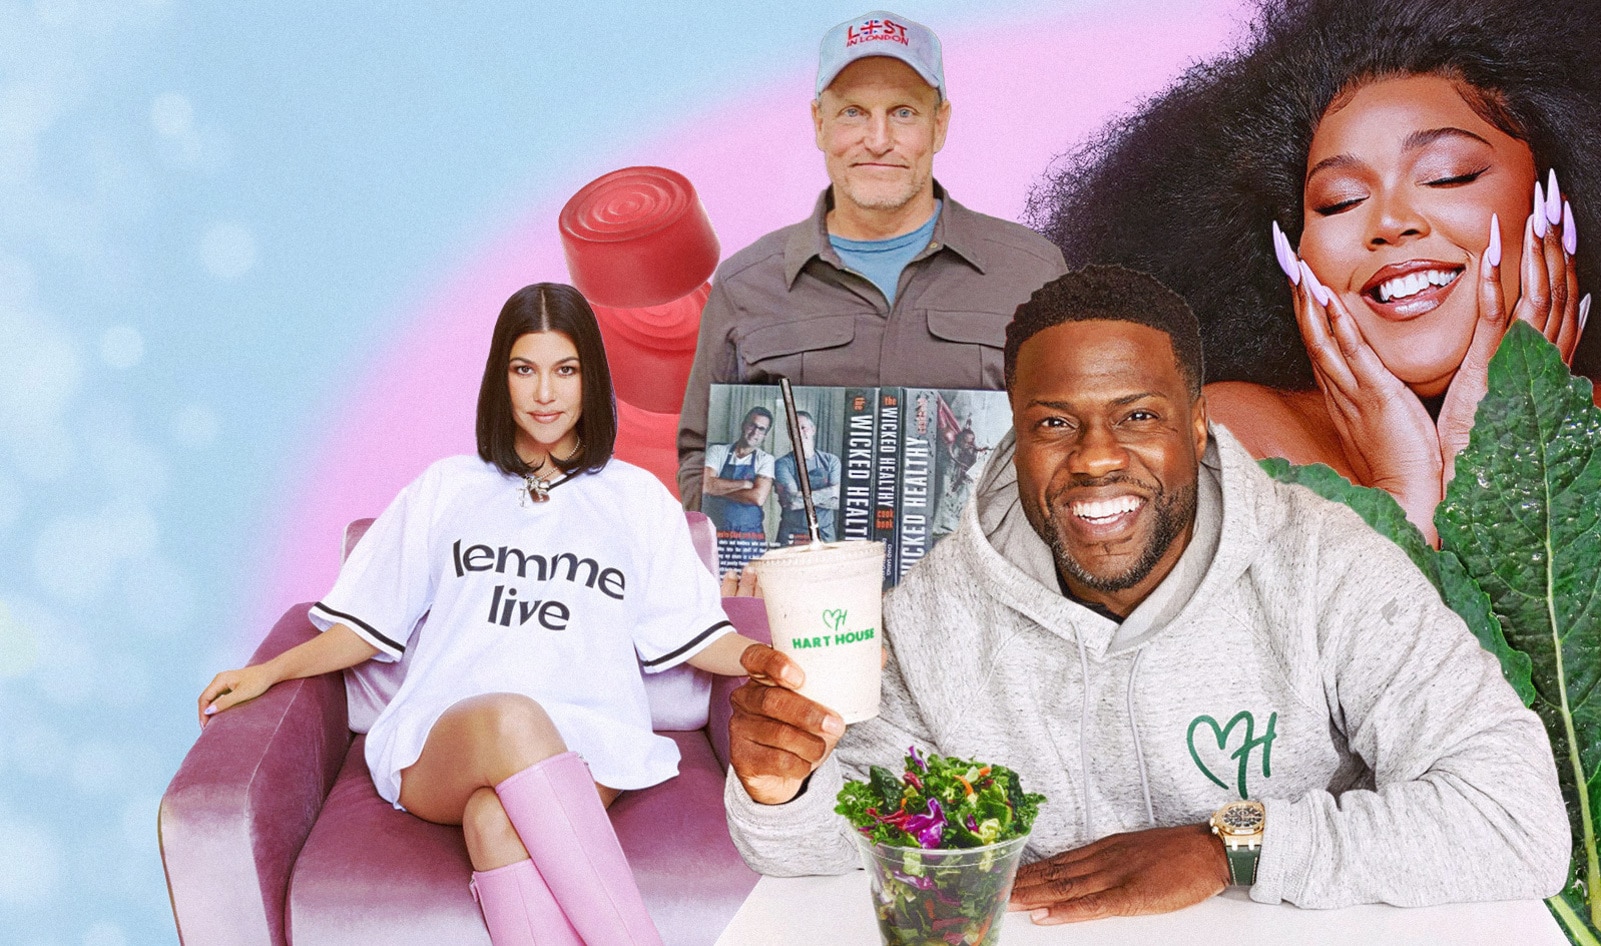 From Kevin Hart's Fast-Food Chain to Lizzo's Cheetos, These are the Top 22 Celebrity Vegan News Stories of 2022